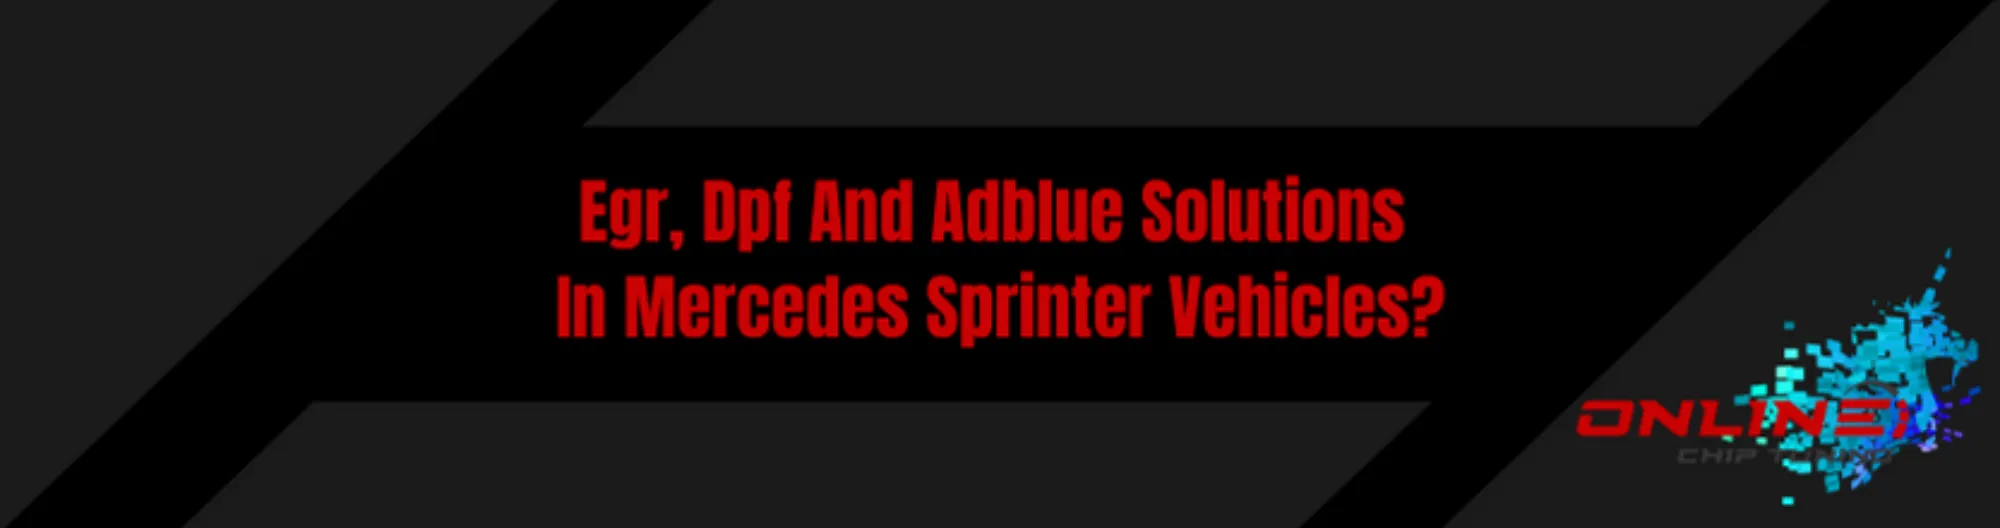 Egr, Dpf And Adblue Solutions In Mercedes Sprinter Vehicles?